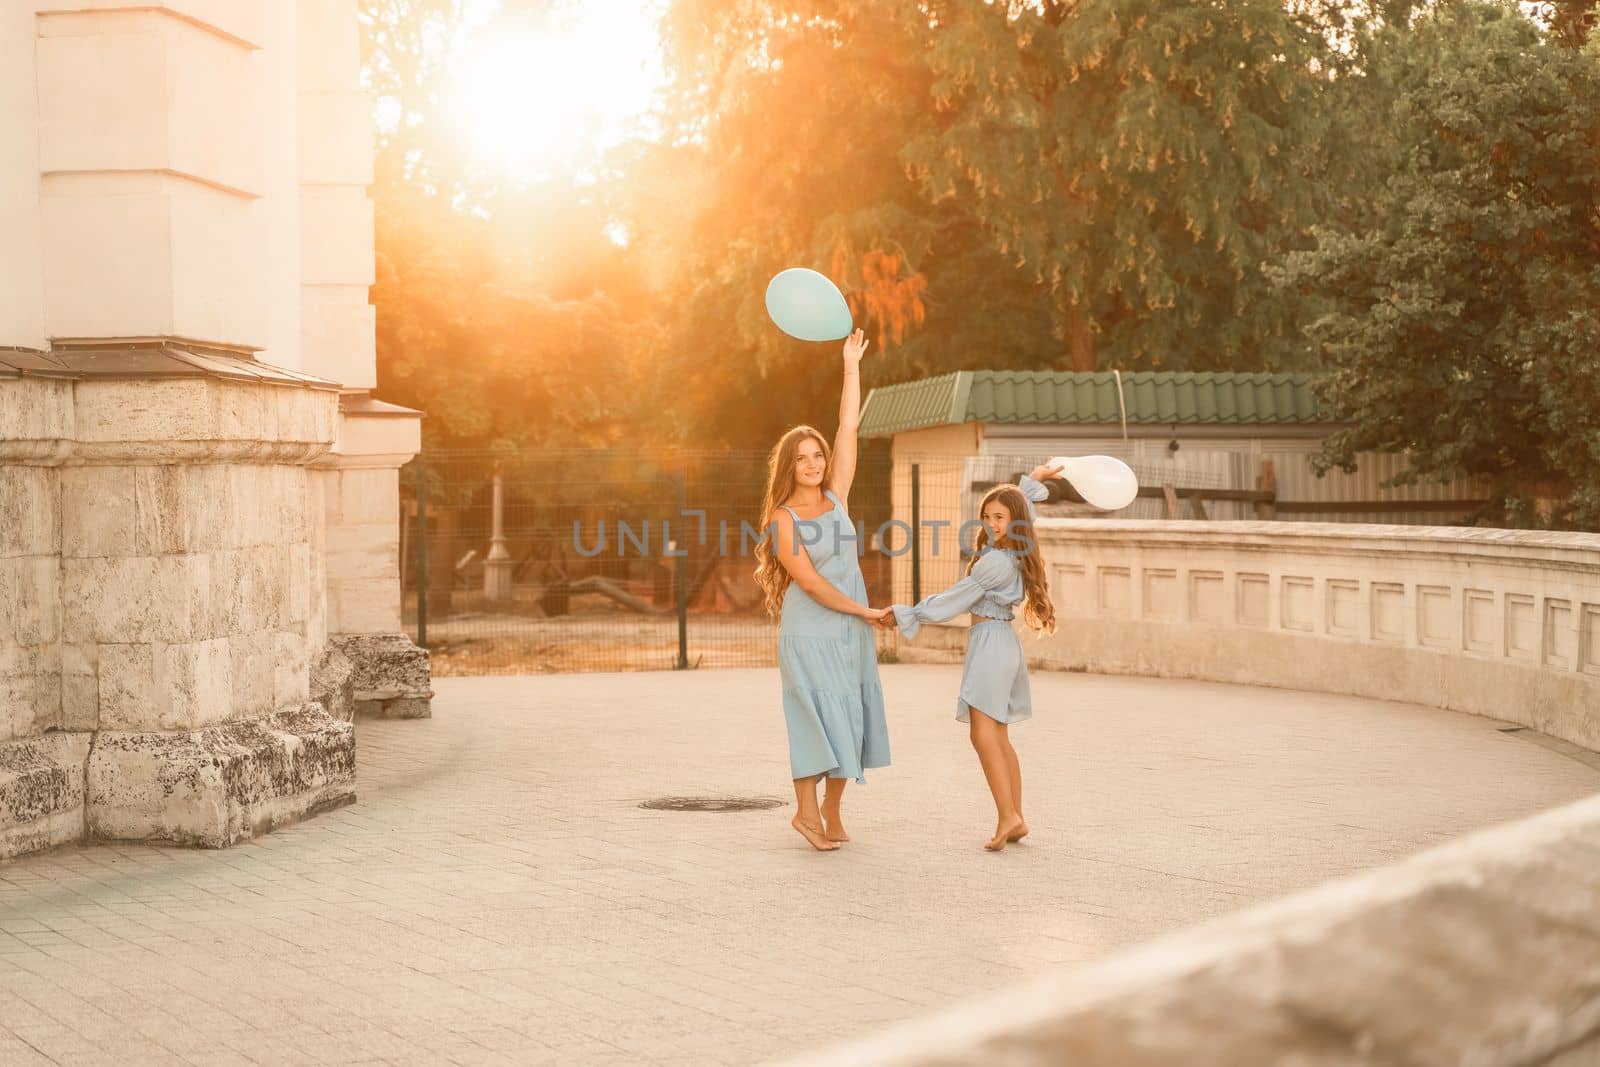 Daughter mother run holding hands. In blue dresses with flowing long hair, they hold balloons in their hands against the backdrop of a sunset and a white building